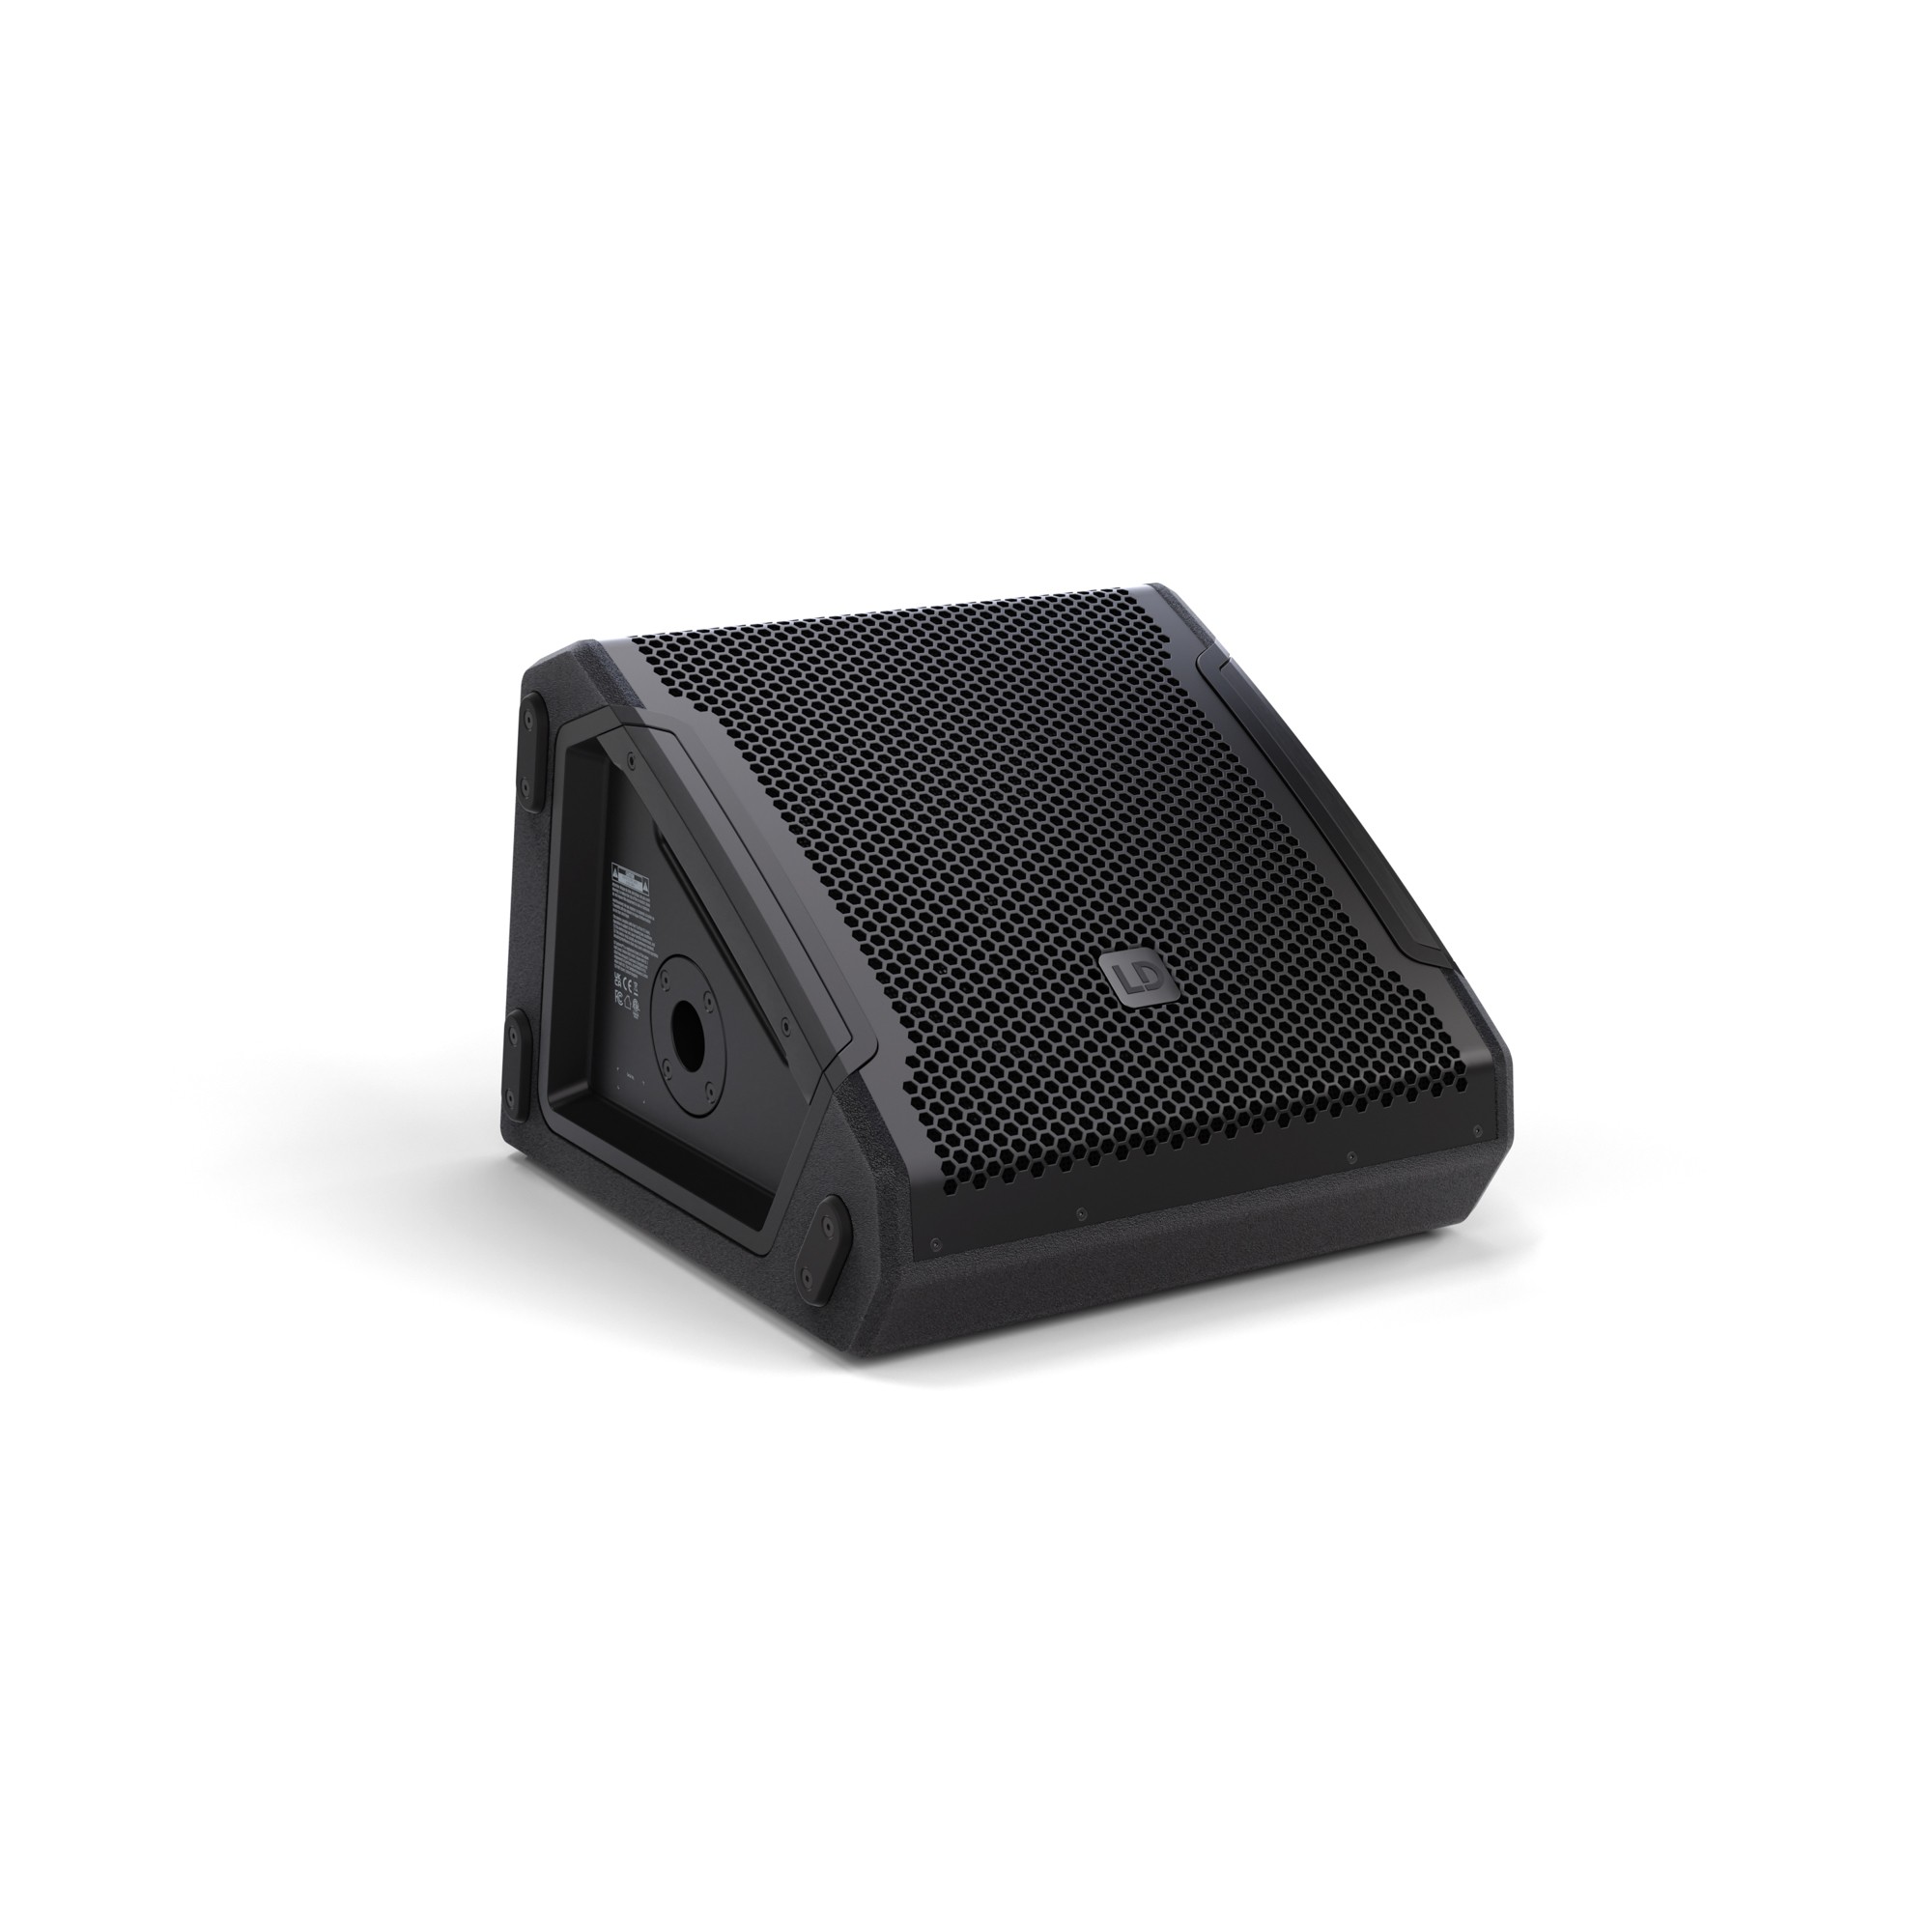 Turbosound TFX122M-AN 12 2-Way Powered Coaxial Stage Monitor